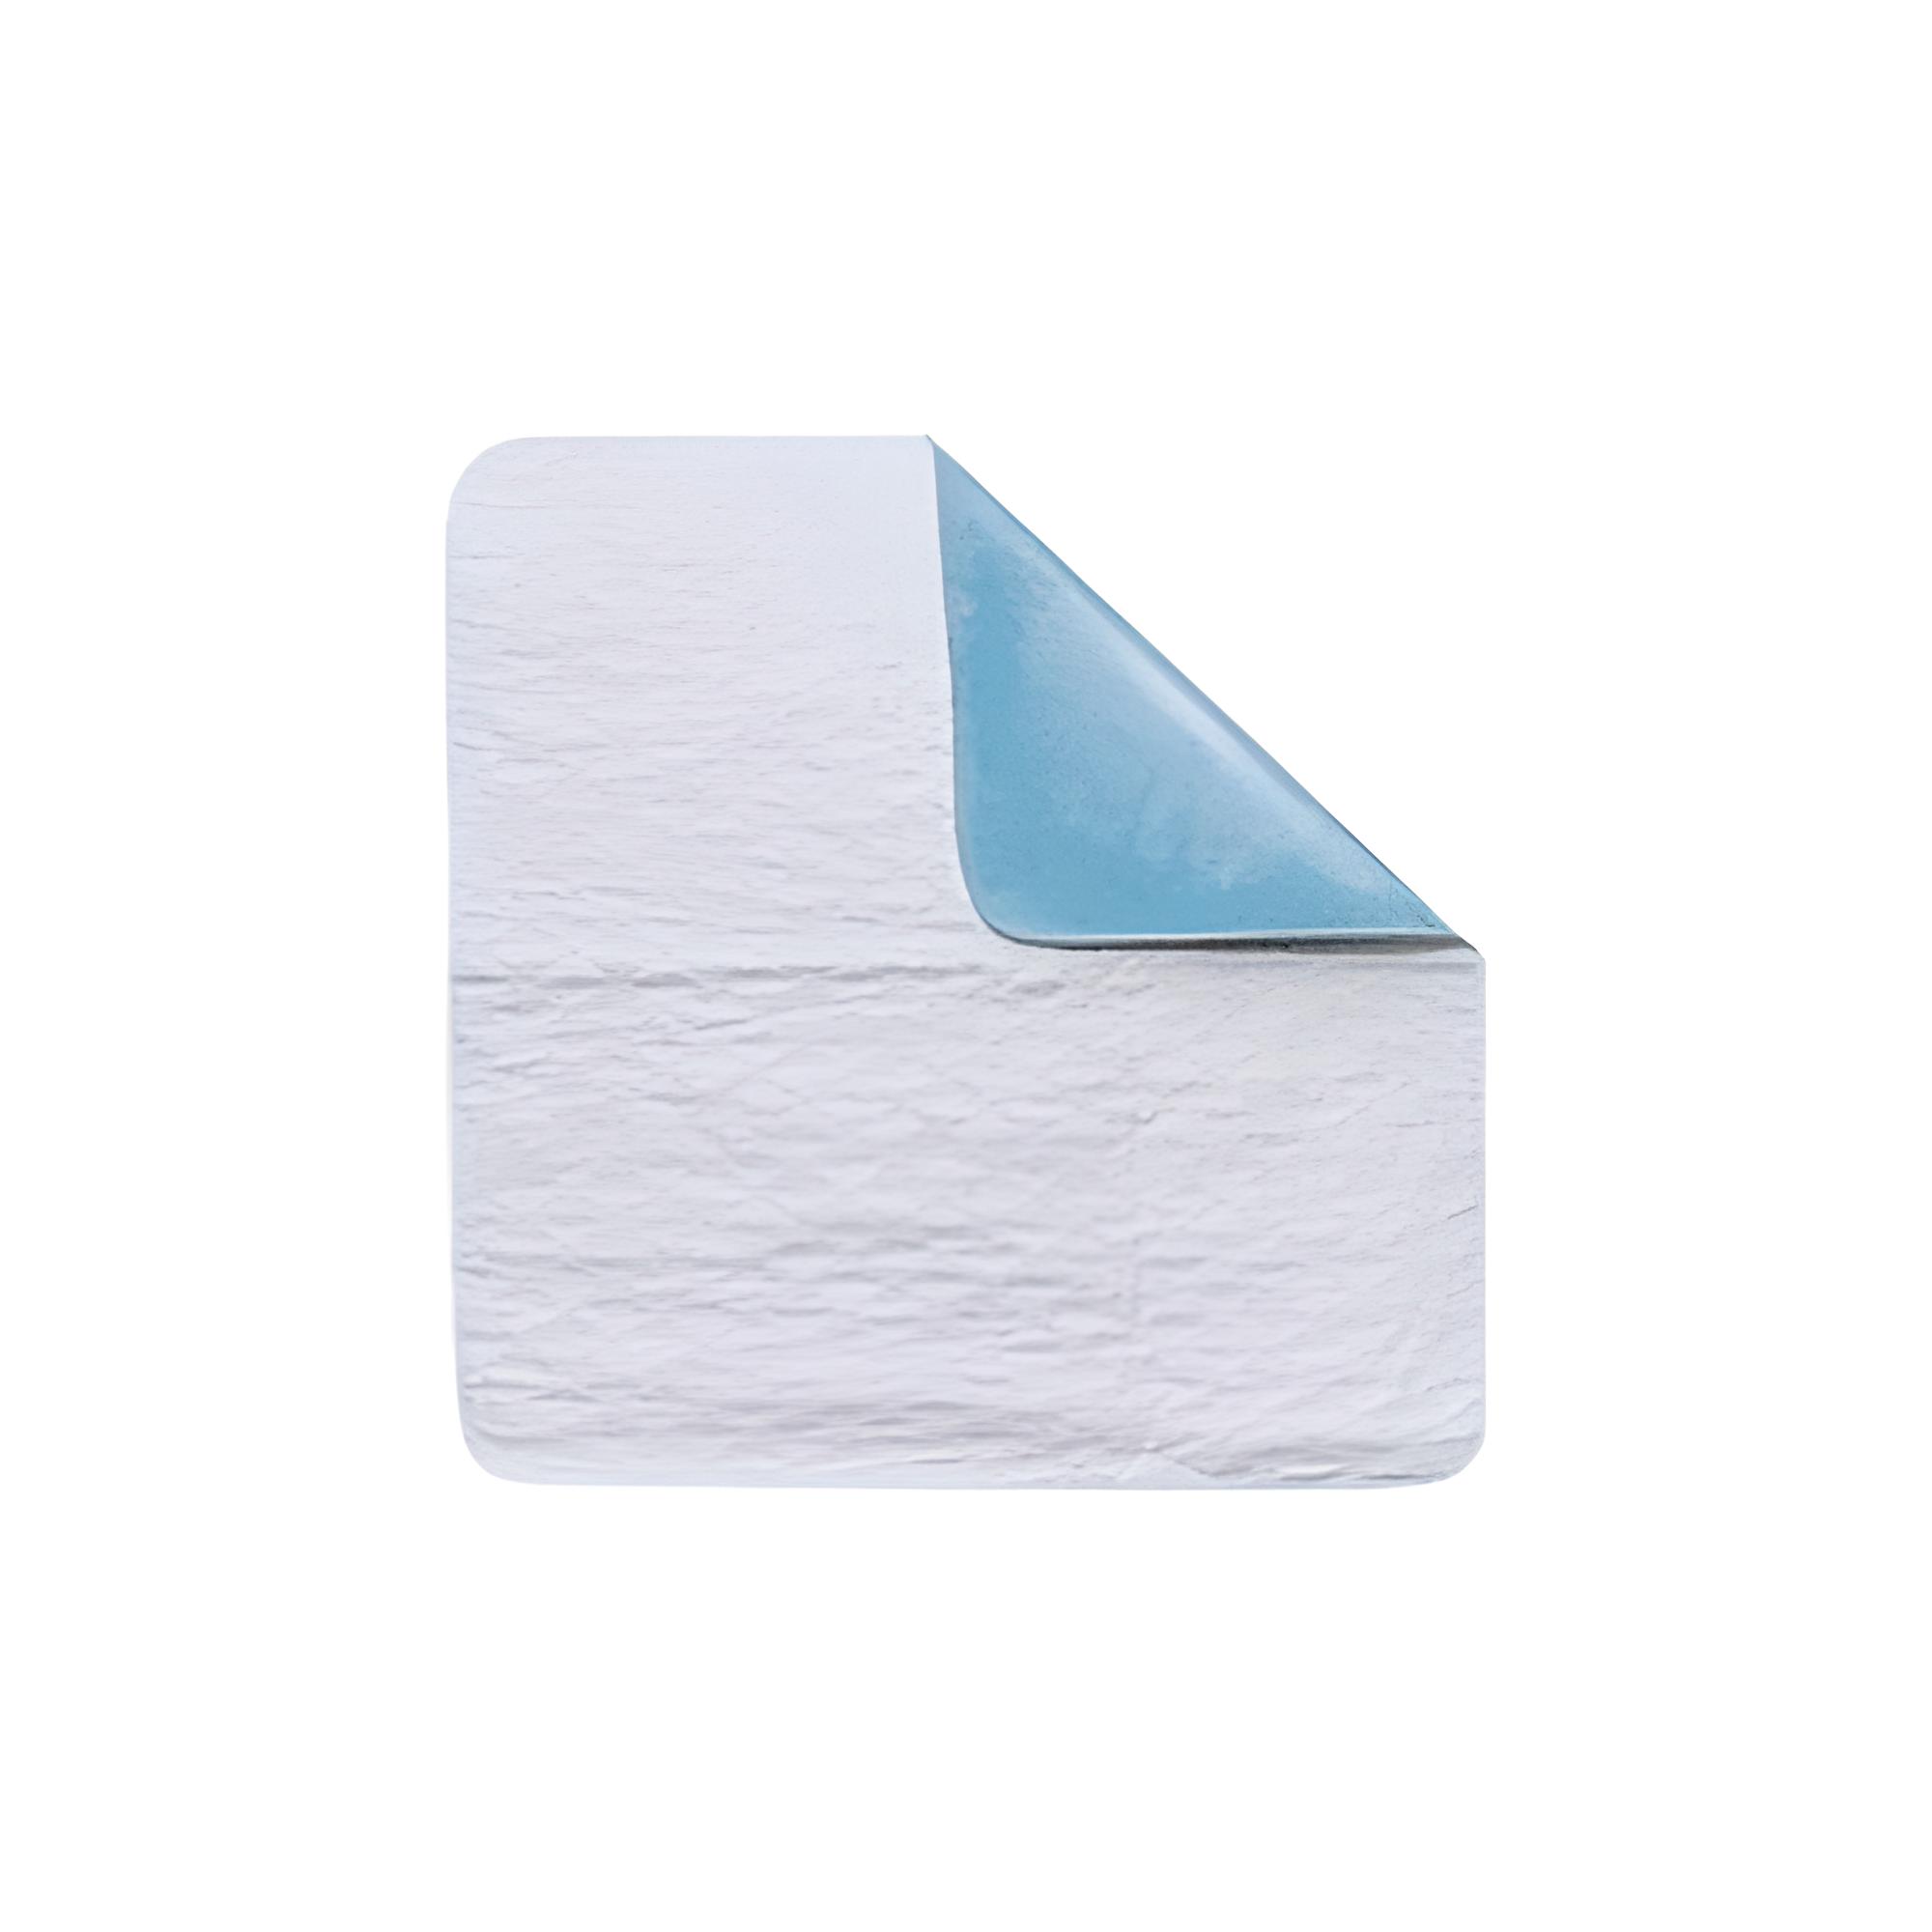 Washable Bed Pads/reusable Incontinence Underpads 30x36-4 Pack